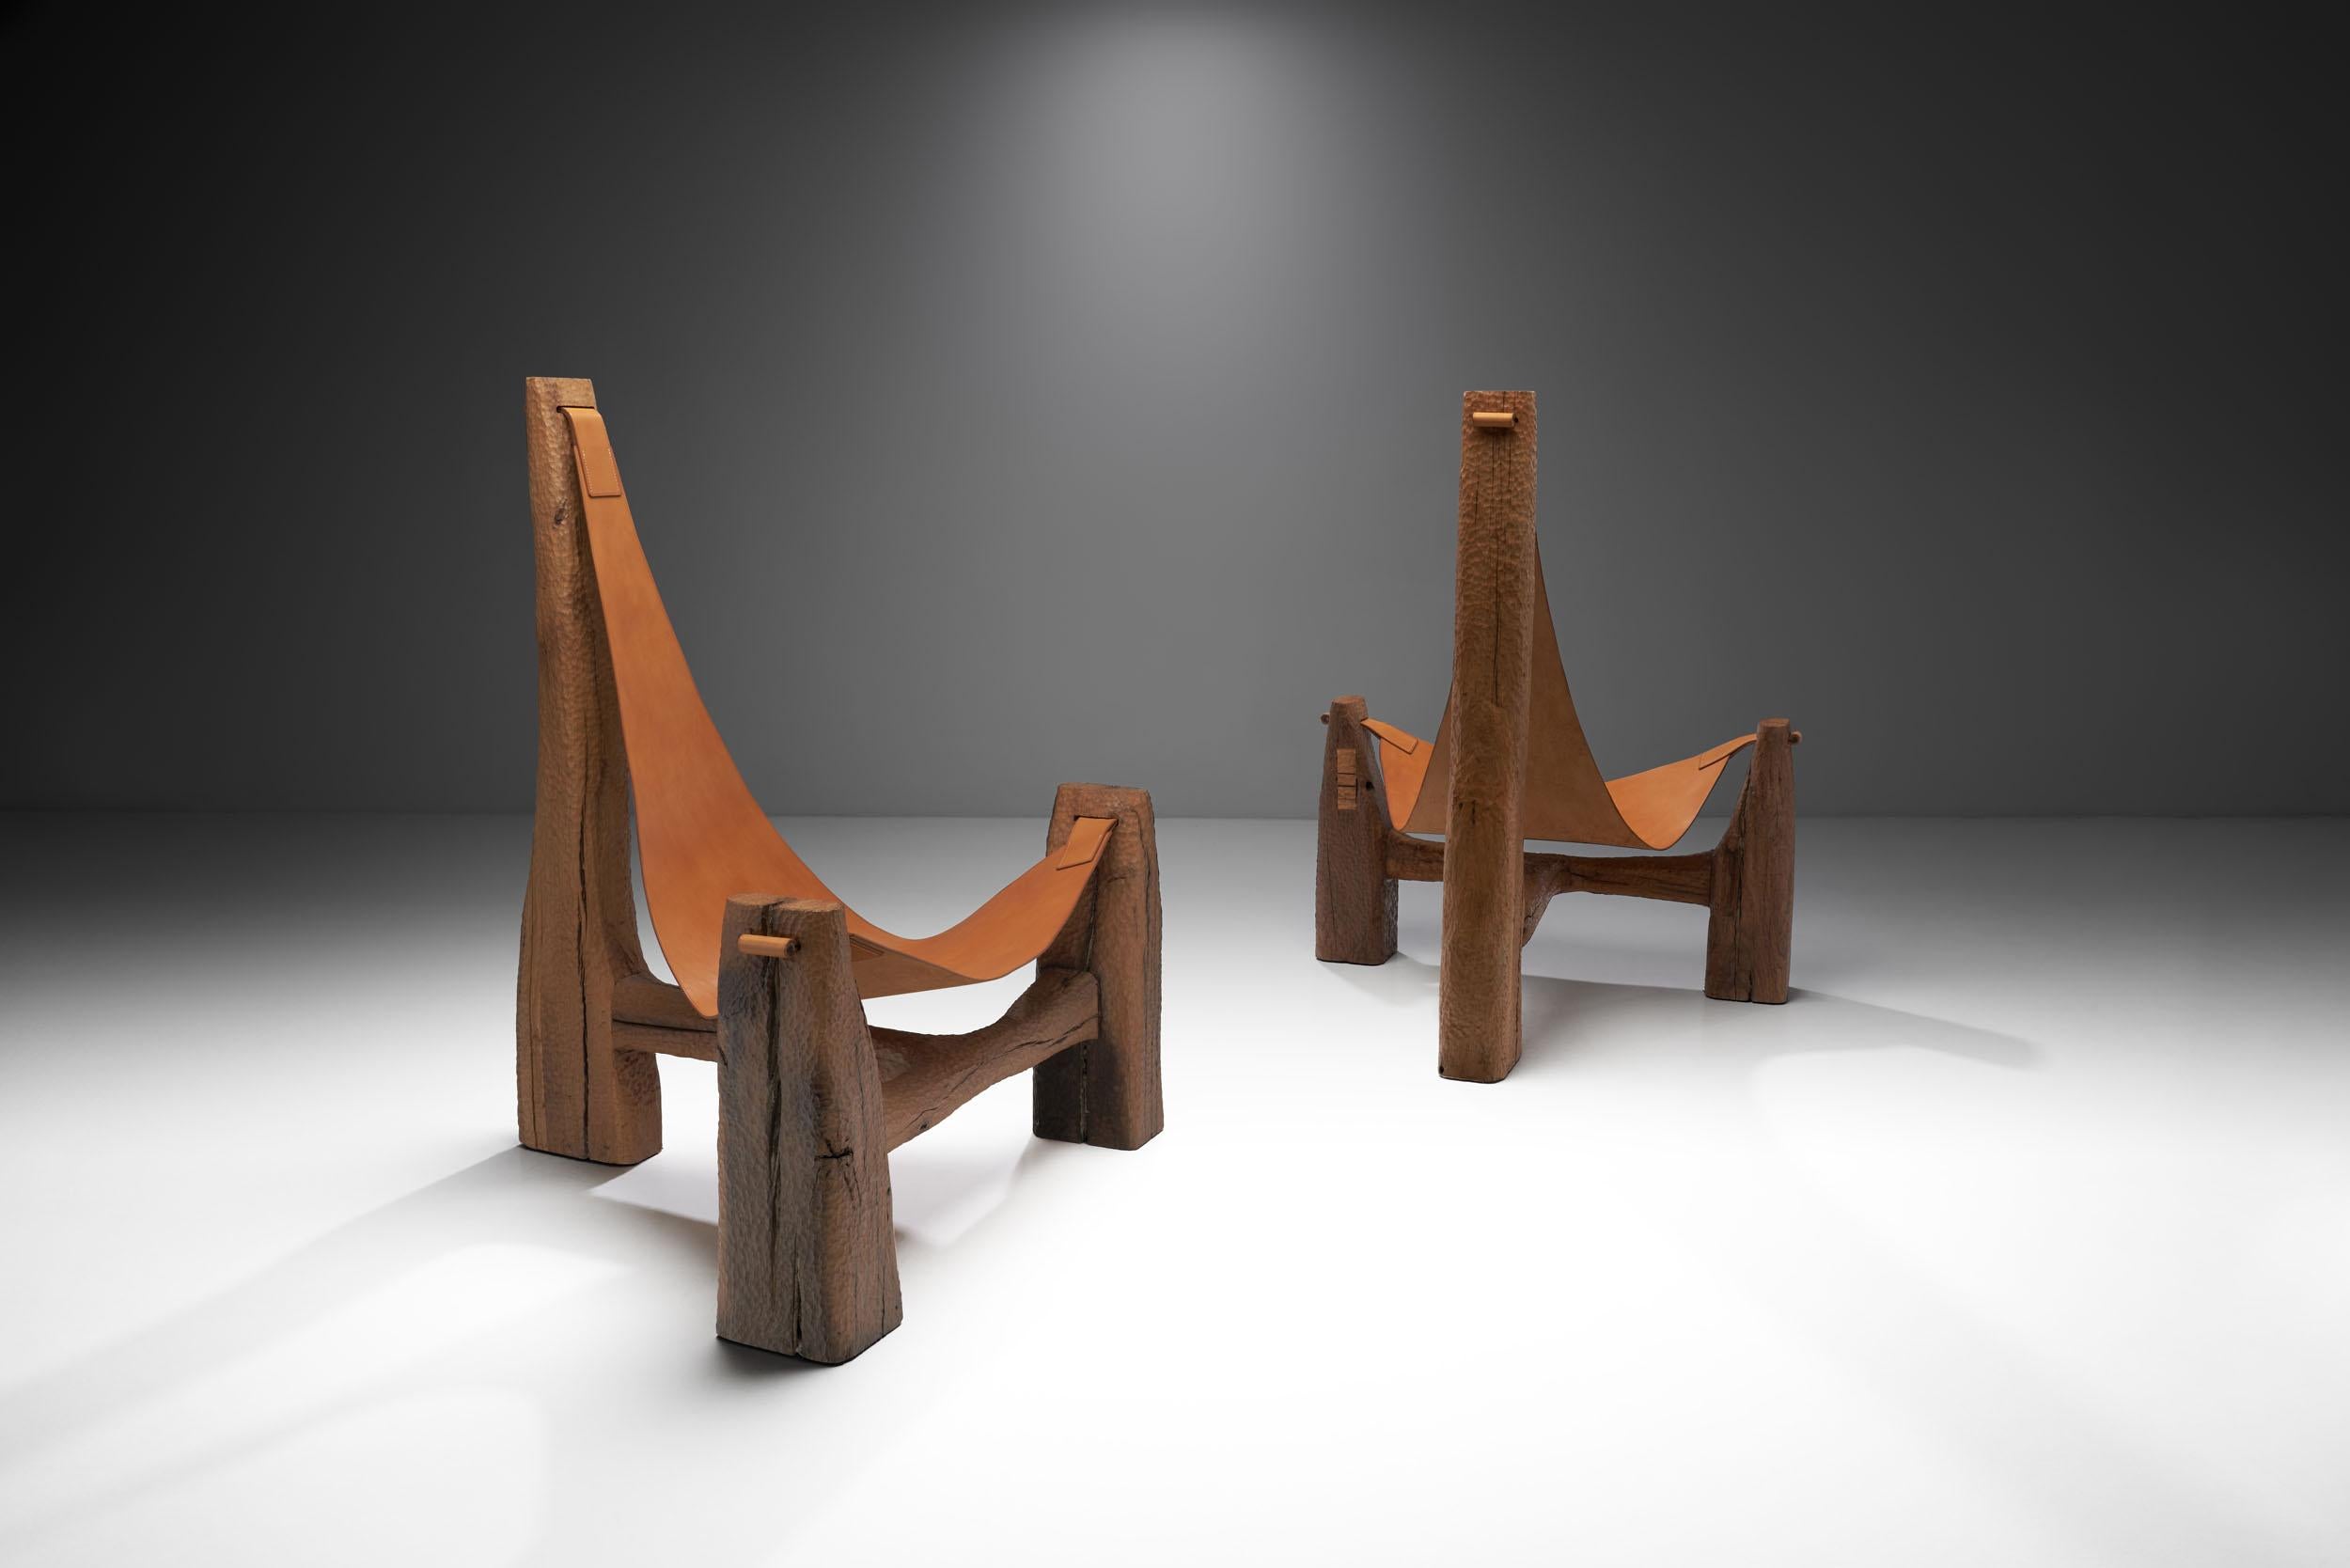 The Czech designer, Pavel Novak’s corpus of work is finally starting to surface, and as these chairs show, we are lucky to witness it. Described as a 